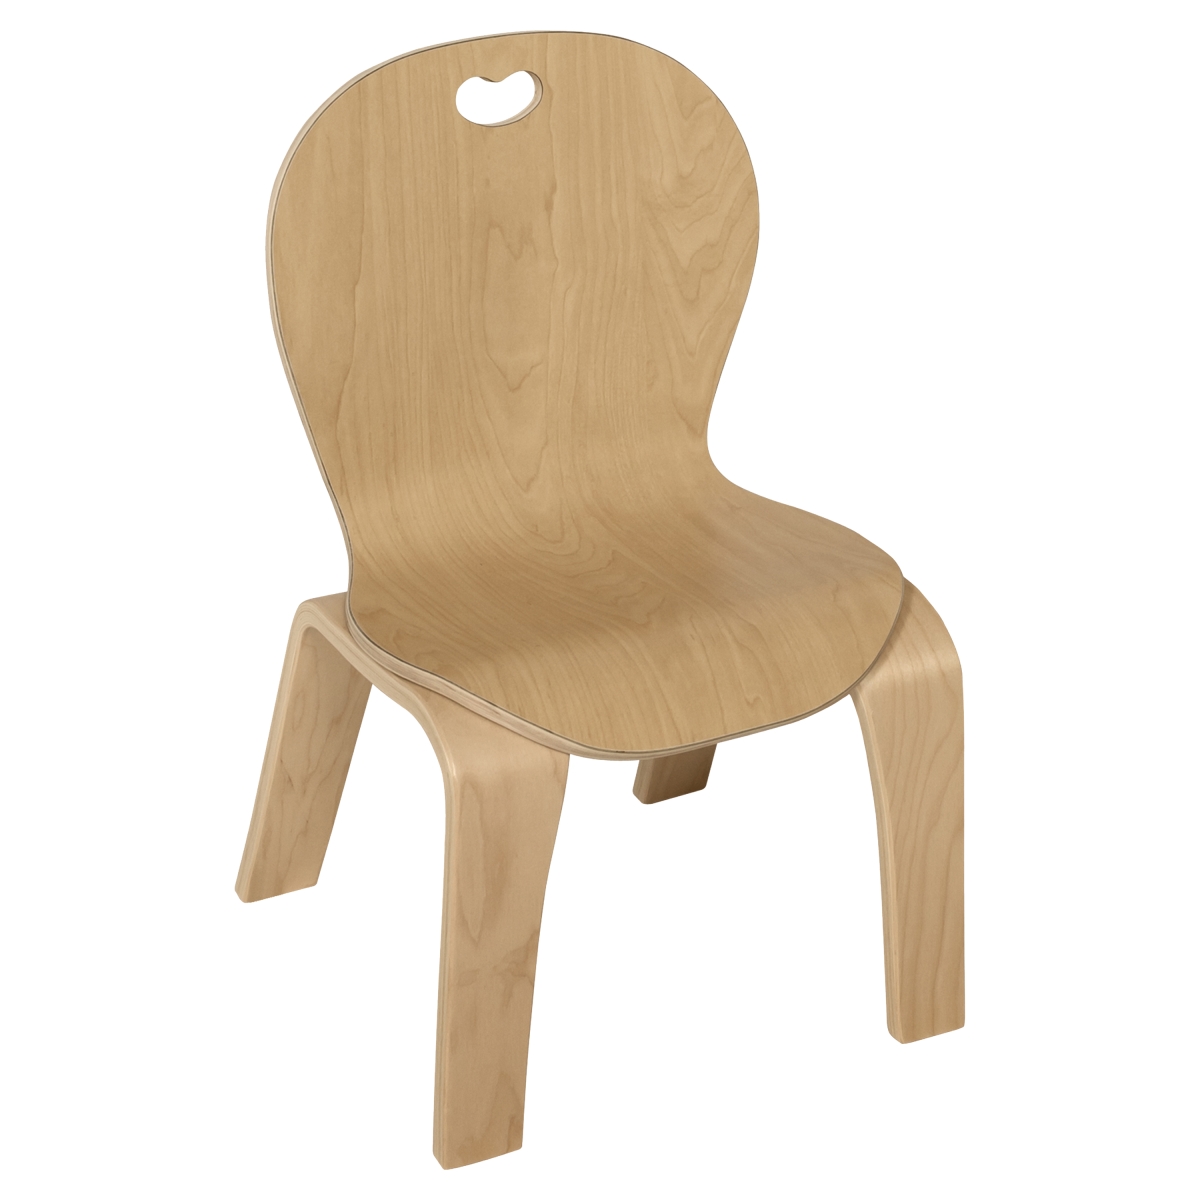 Mh881001 10 In. Bentwood Kids Chair